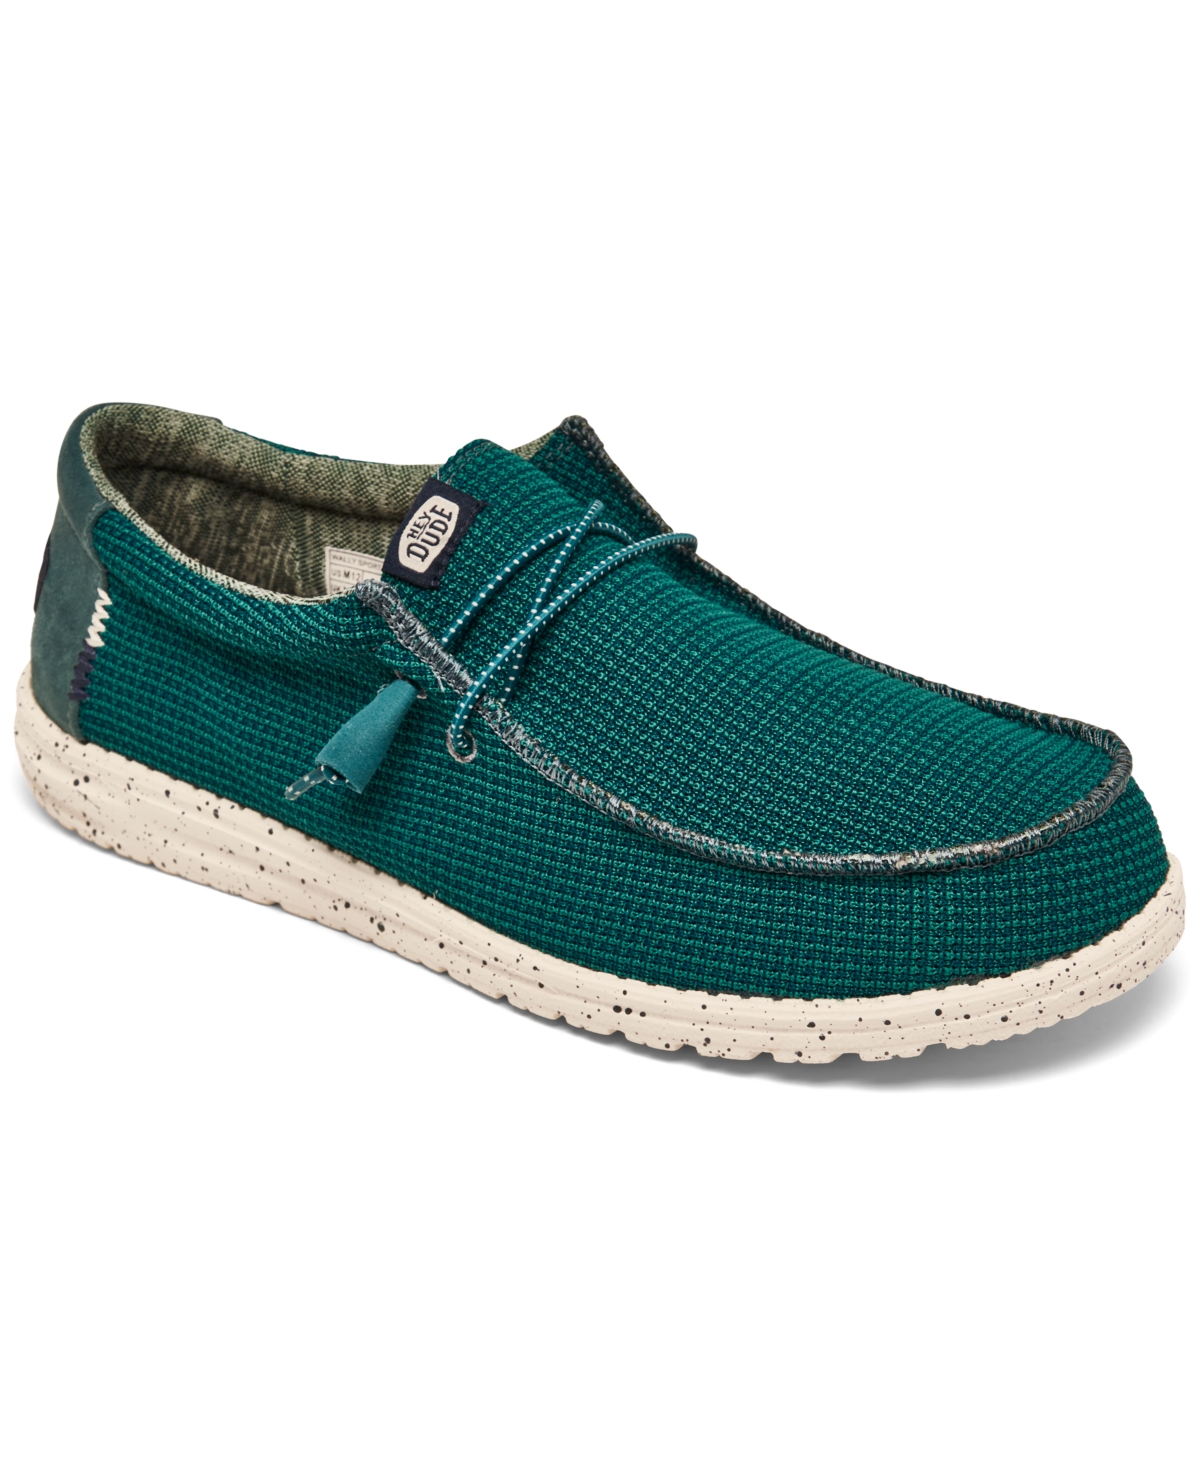 Men's Wally Sport Mesh Casual Moccasin Sneakers from Finish Line - Teal